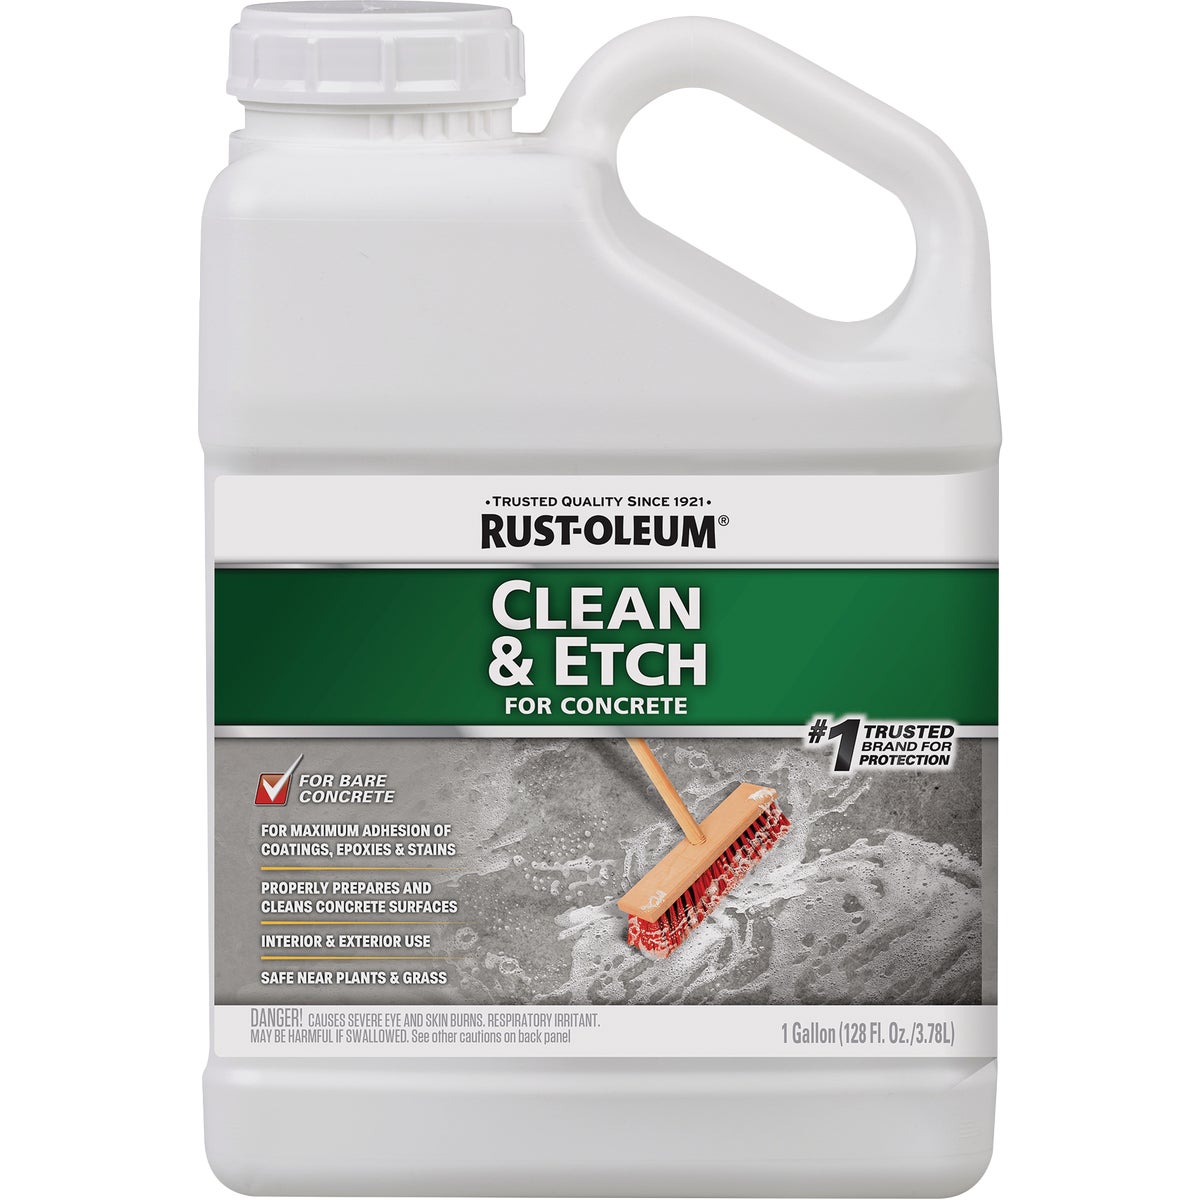 Item 771994, Rust-Oleum Clean &amp; Etch is an etching solution used to clean and 